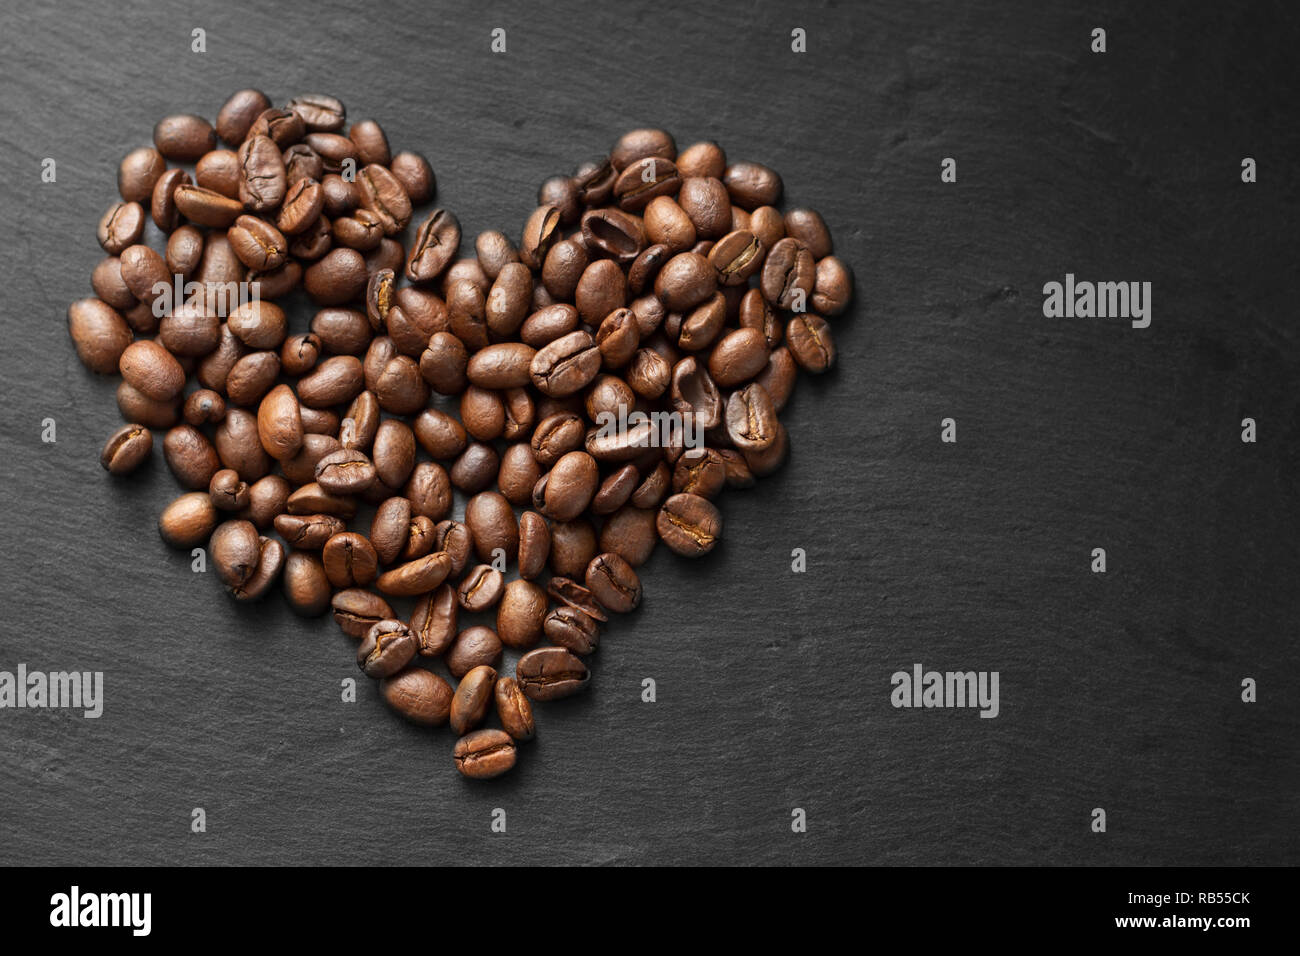 heart symbol made of coffee beans Stock Photo